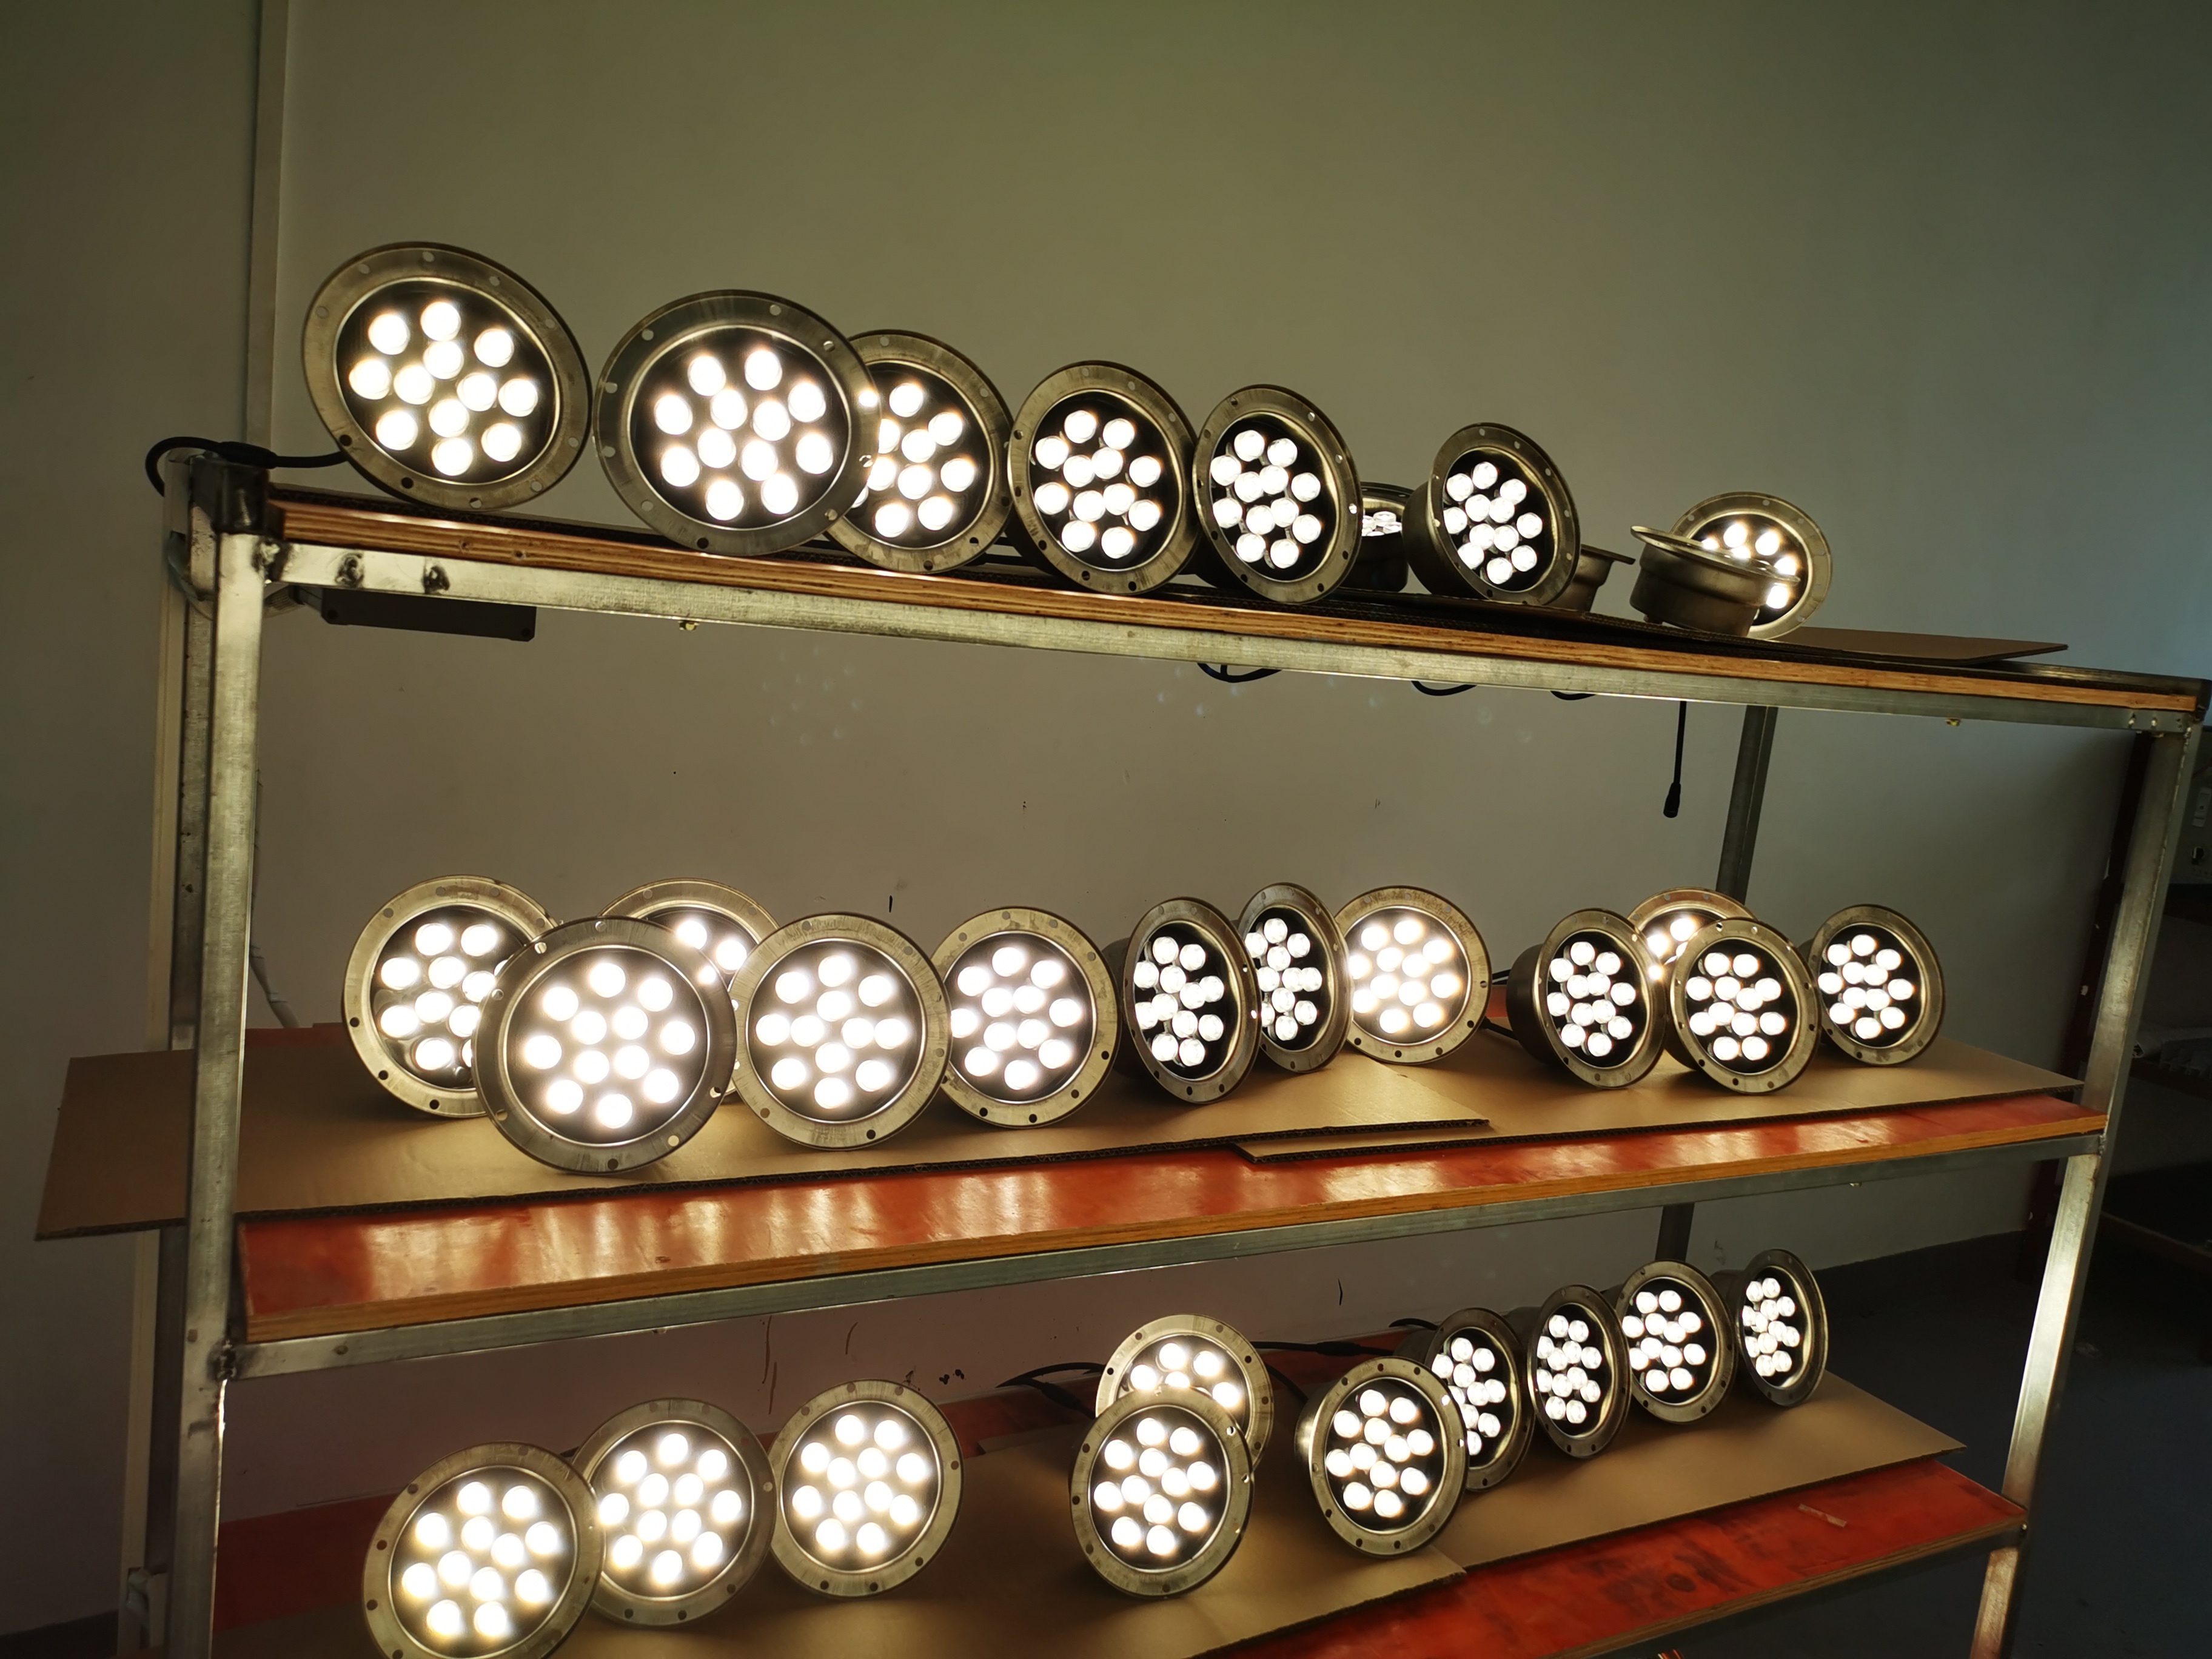 IP68LED underwater light made of stainless steel